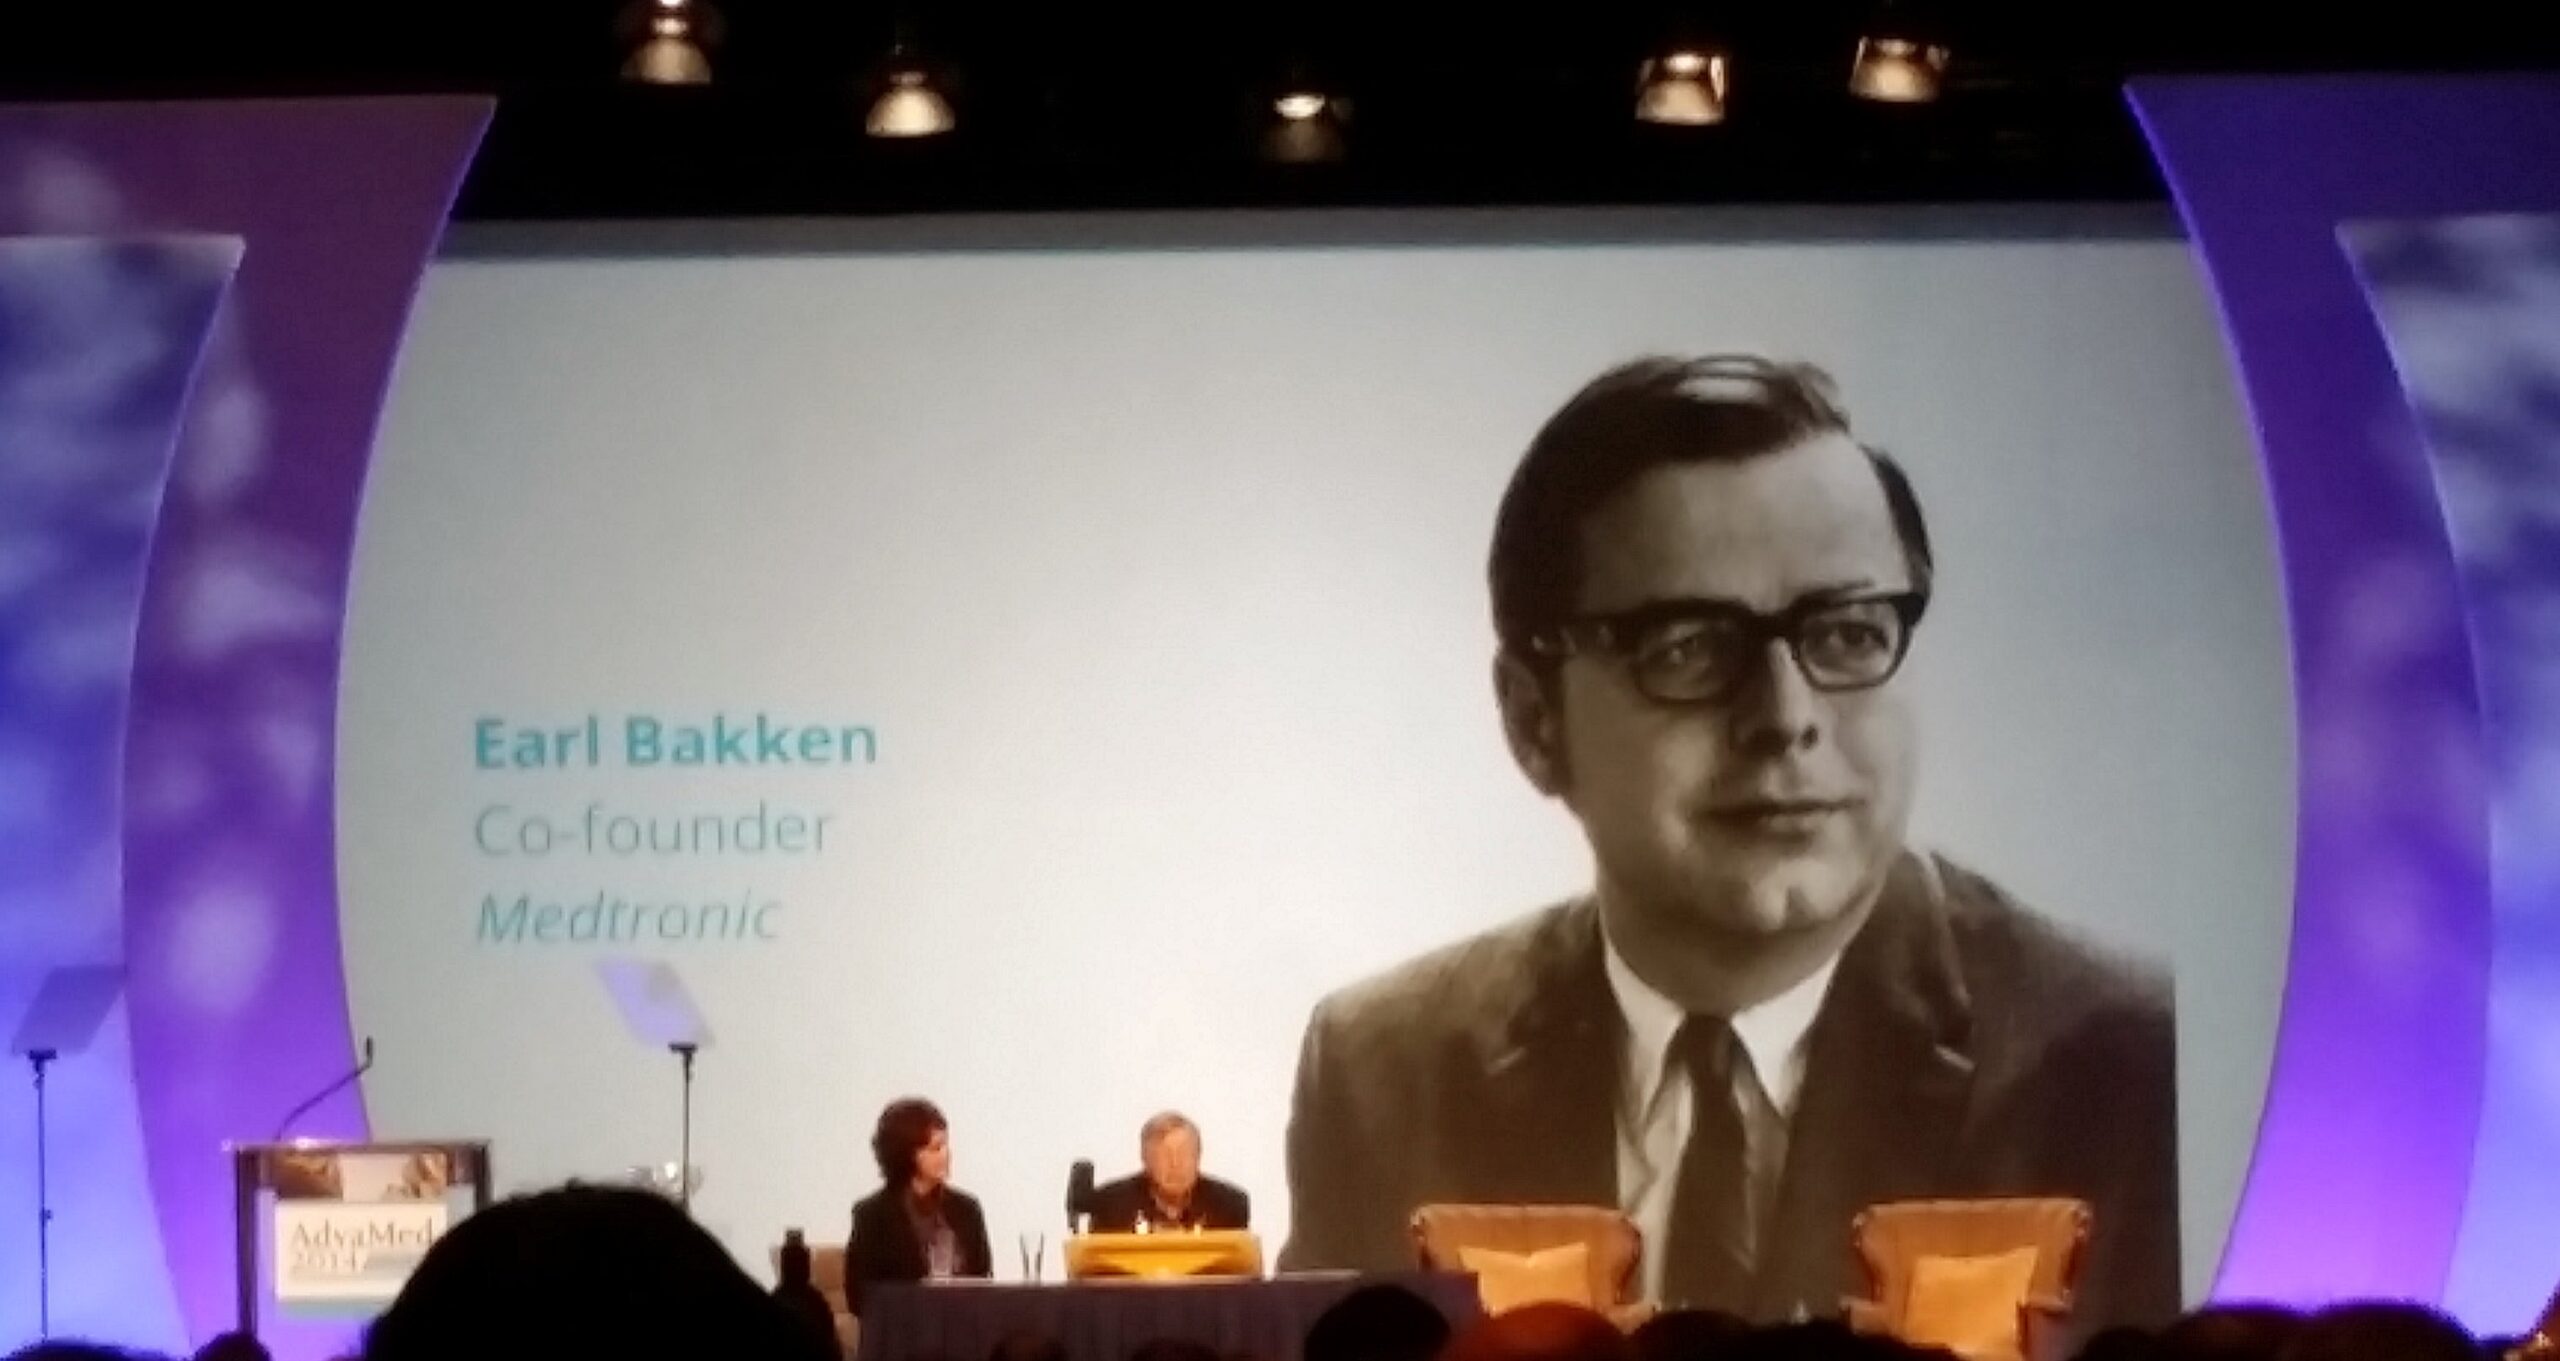 Medtronic co-founder Earl Bakken receives a Life Time Achievement award from AdvaMed in 2014